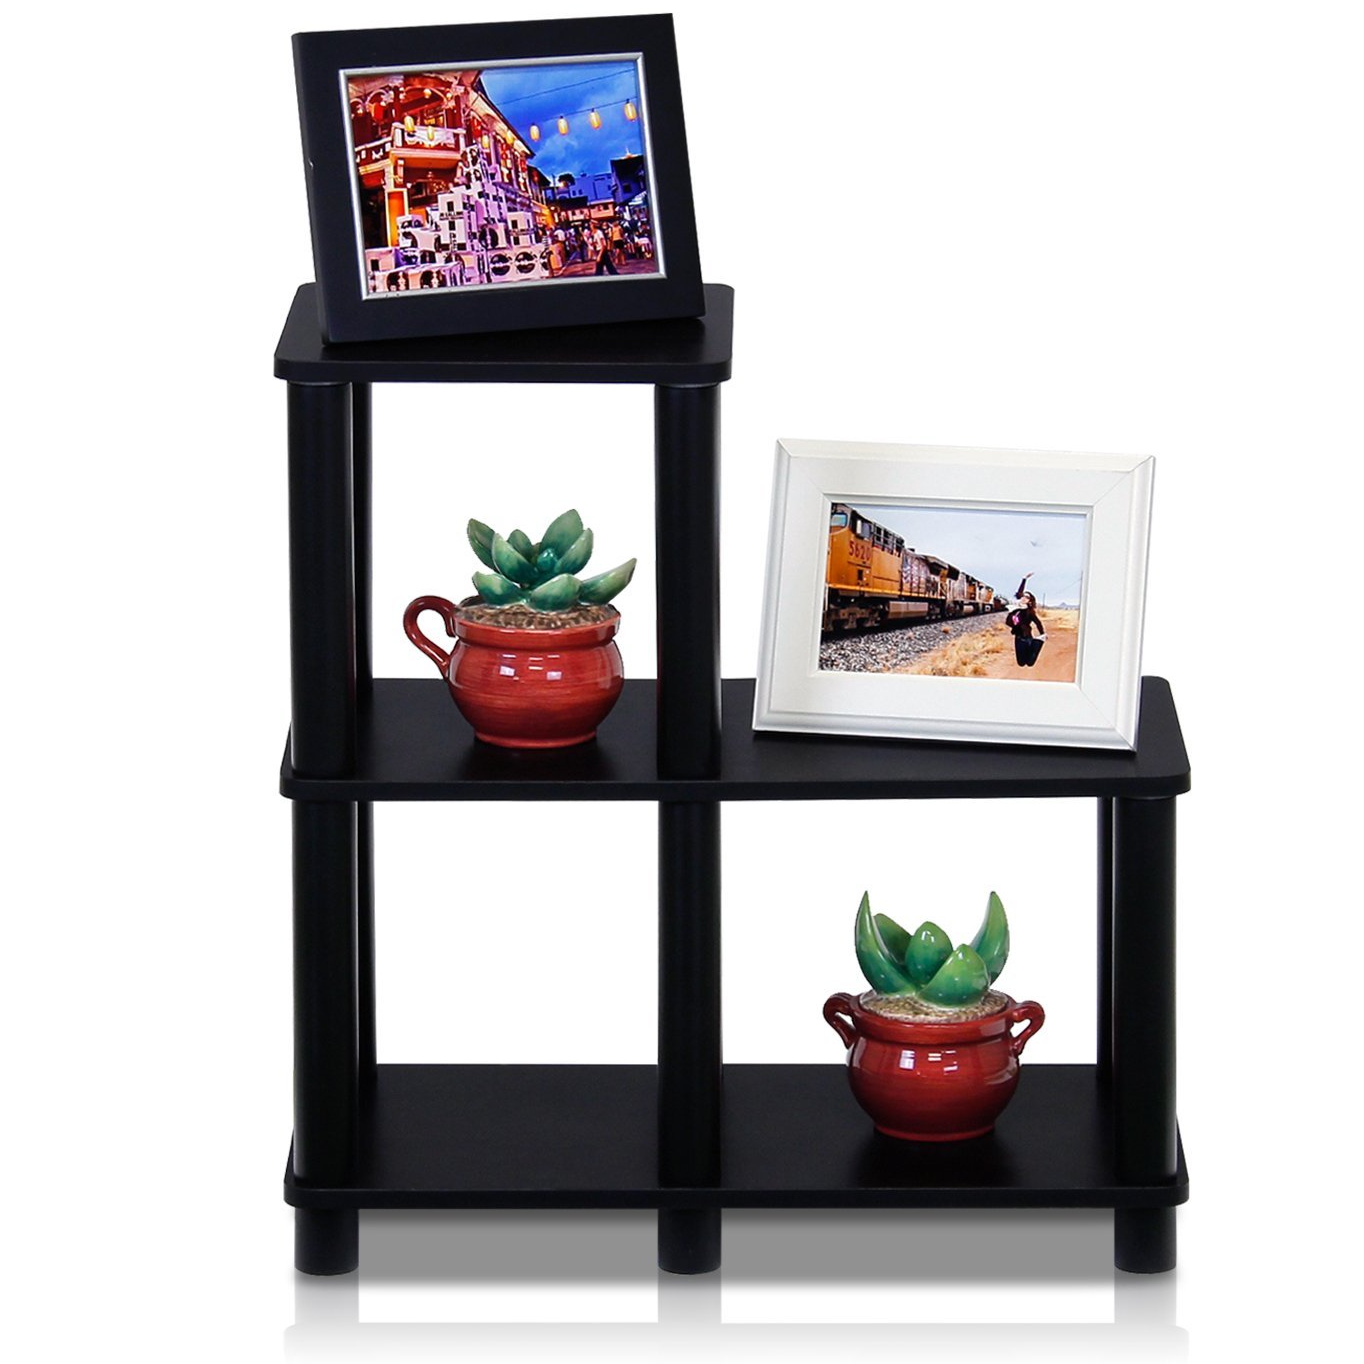 Furinno Turn-N-Tube Accent Decorative Shelf Only $12.86!